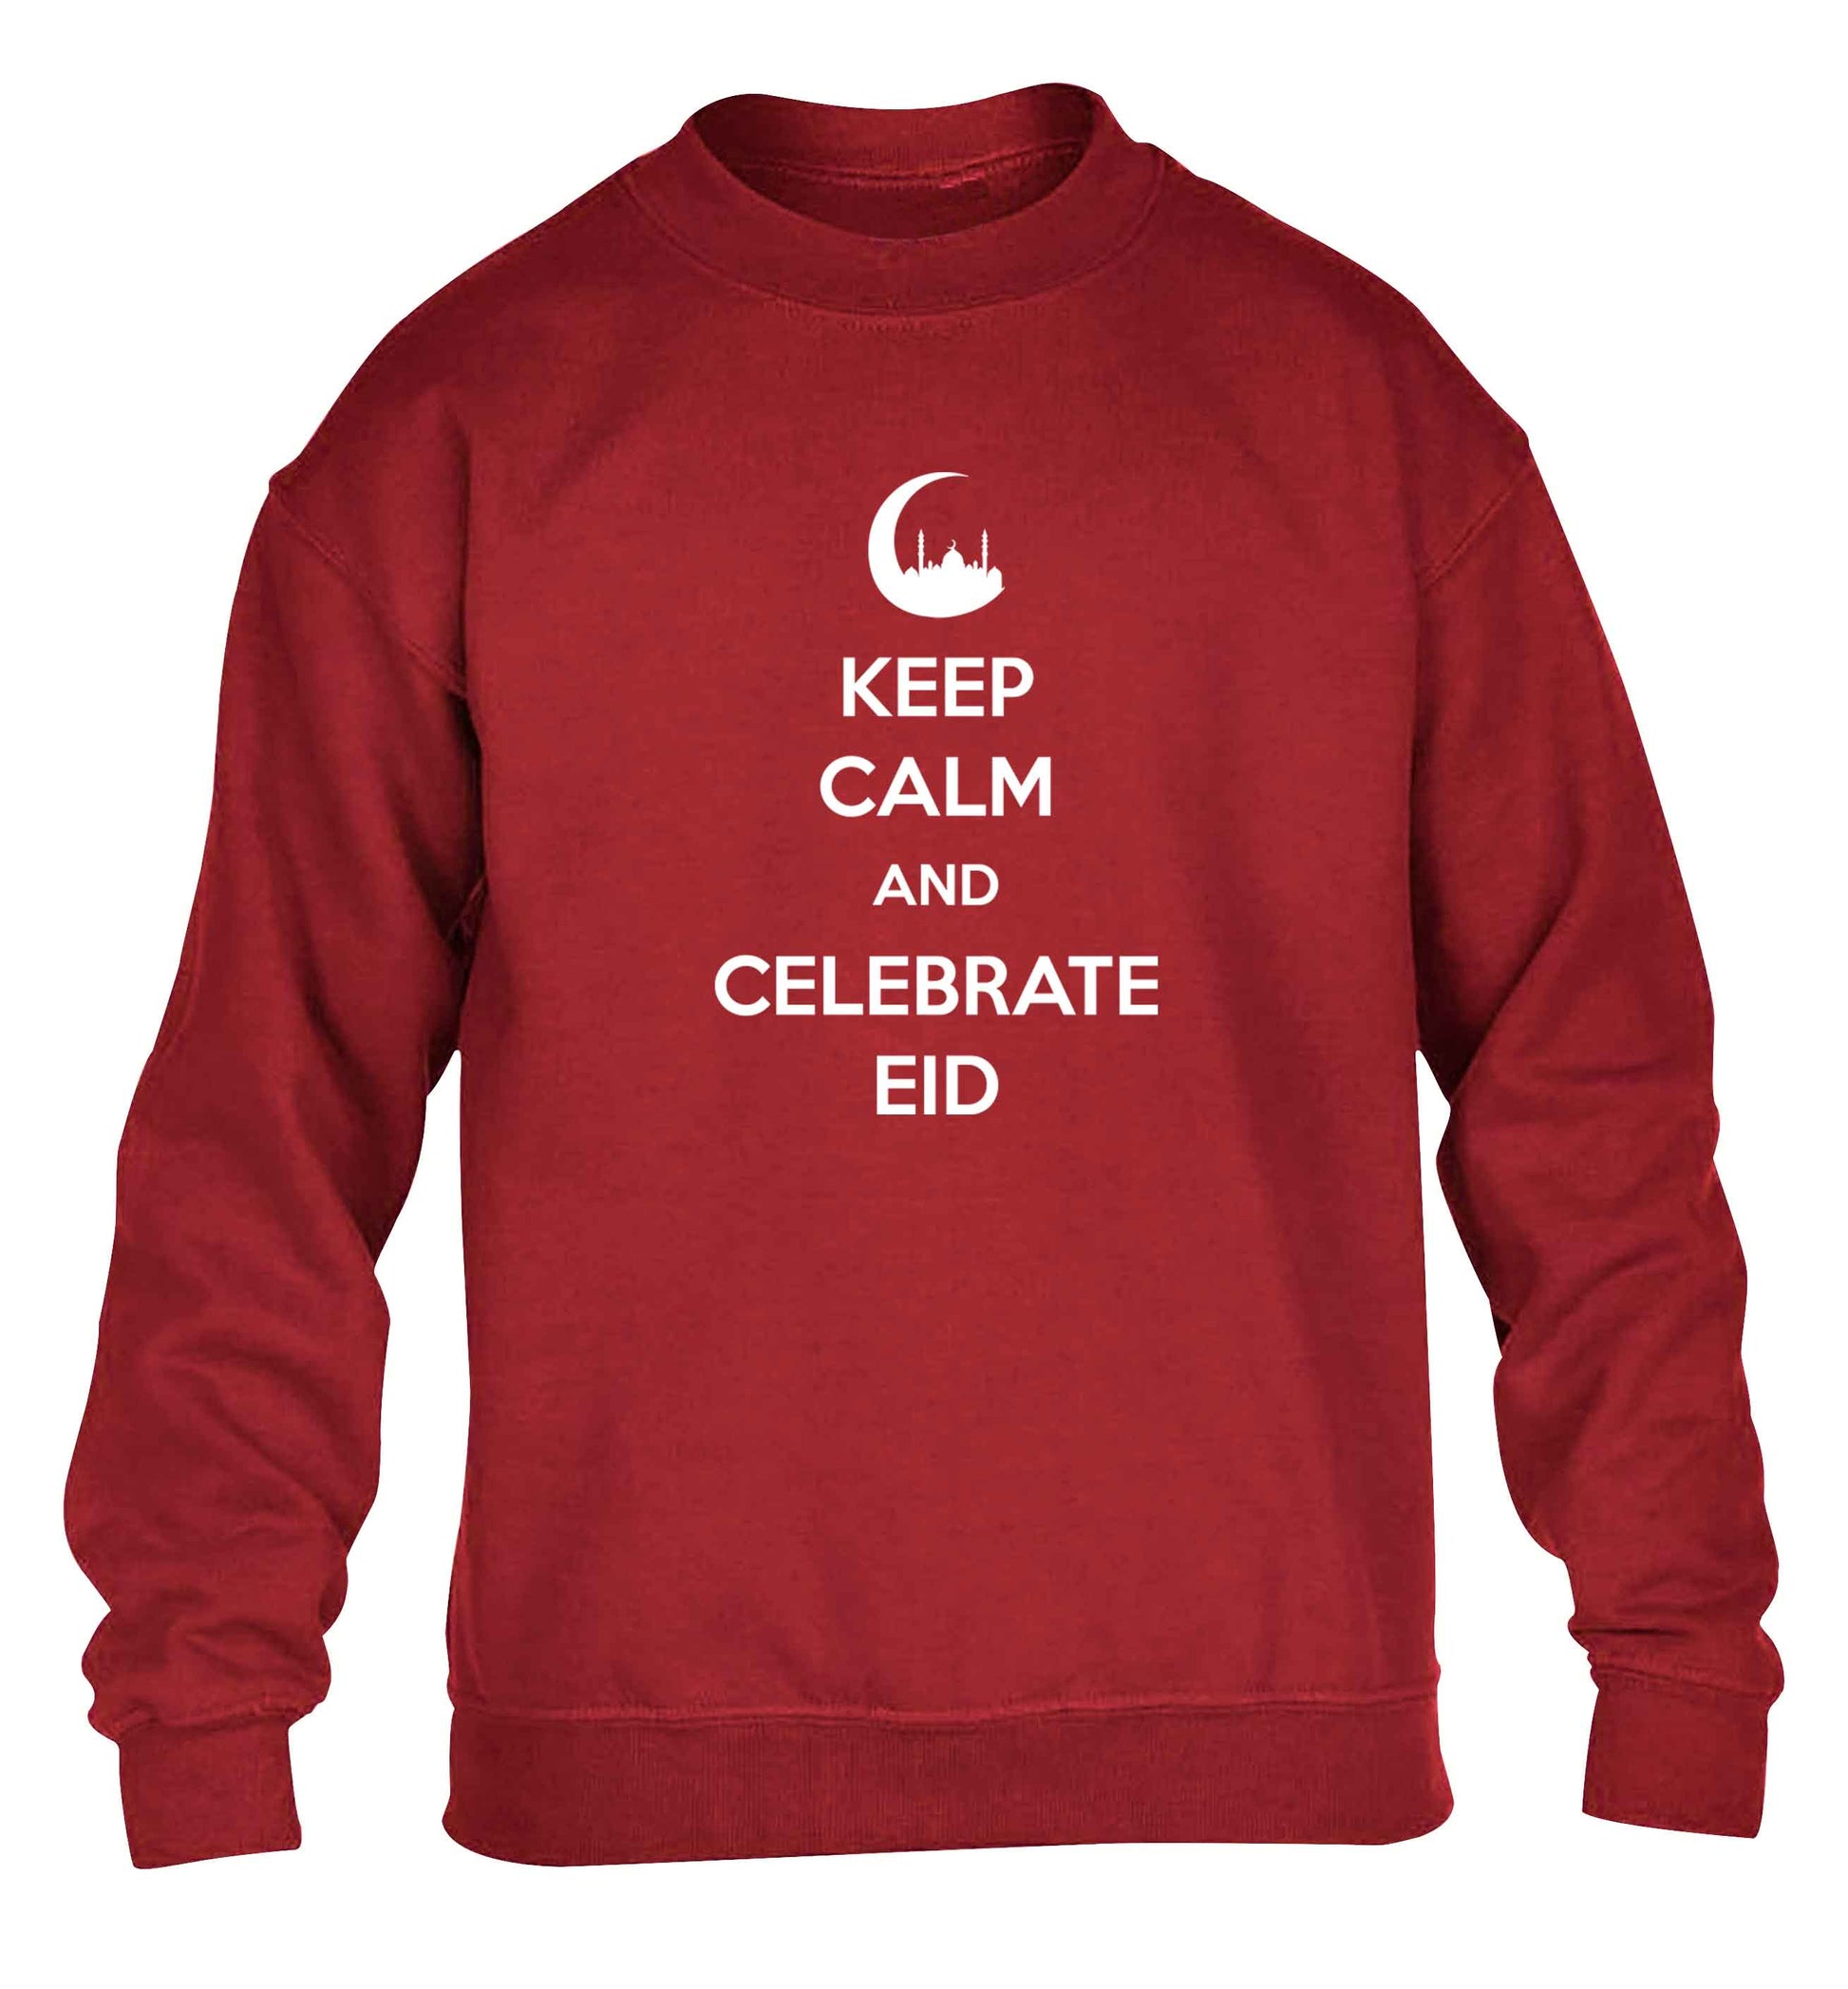 Keep calm and celebrate Eid children's grey sweater 12-13 Years